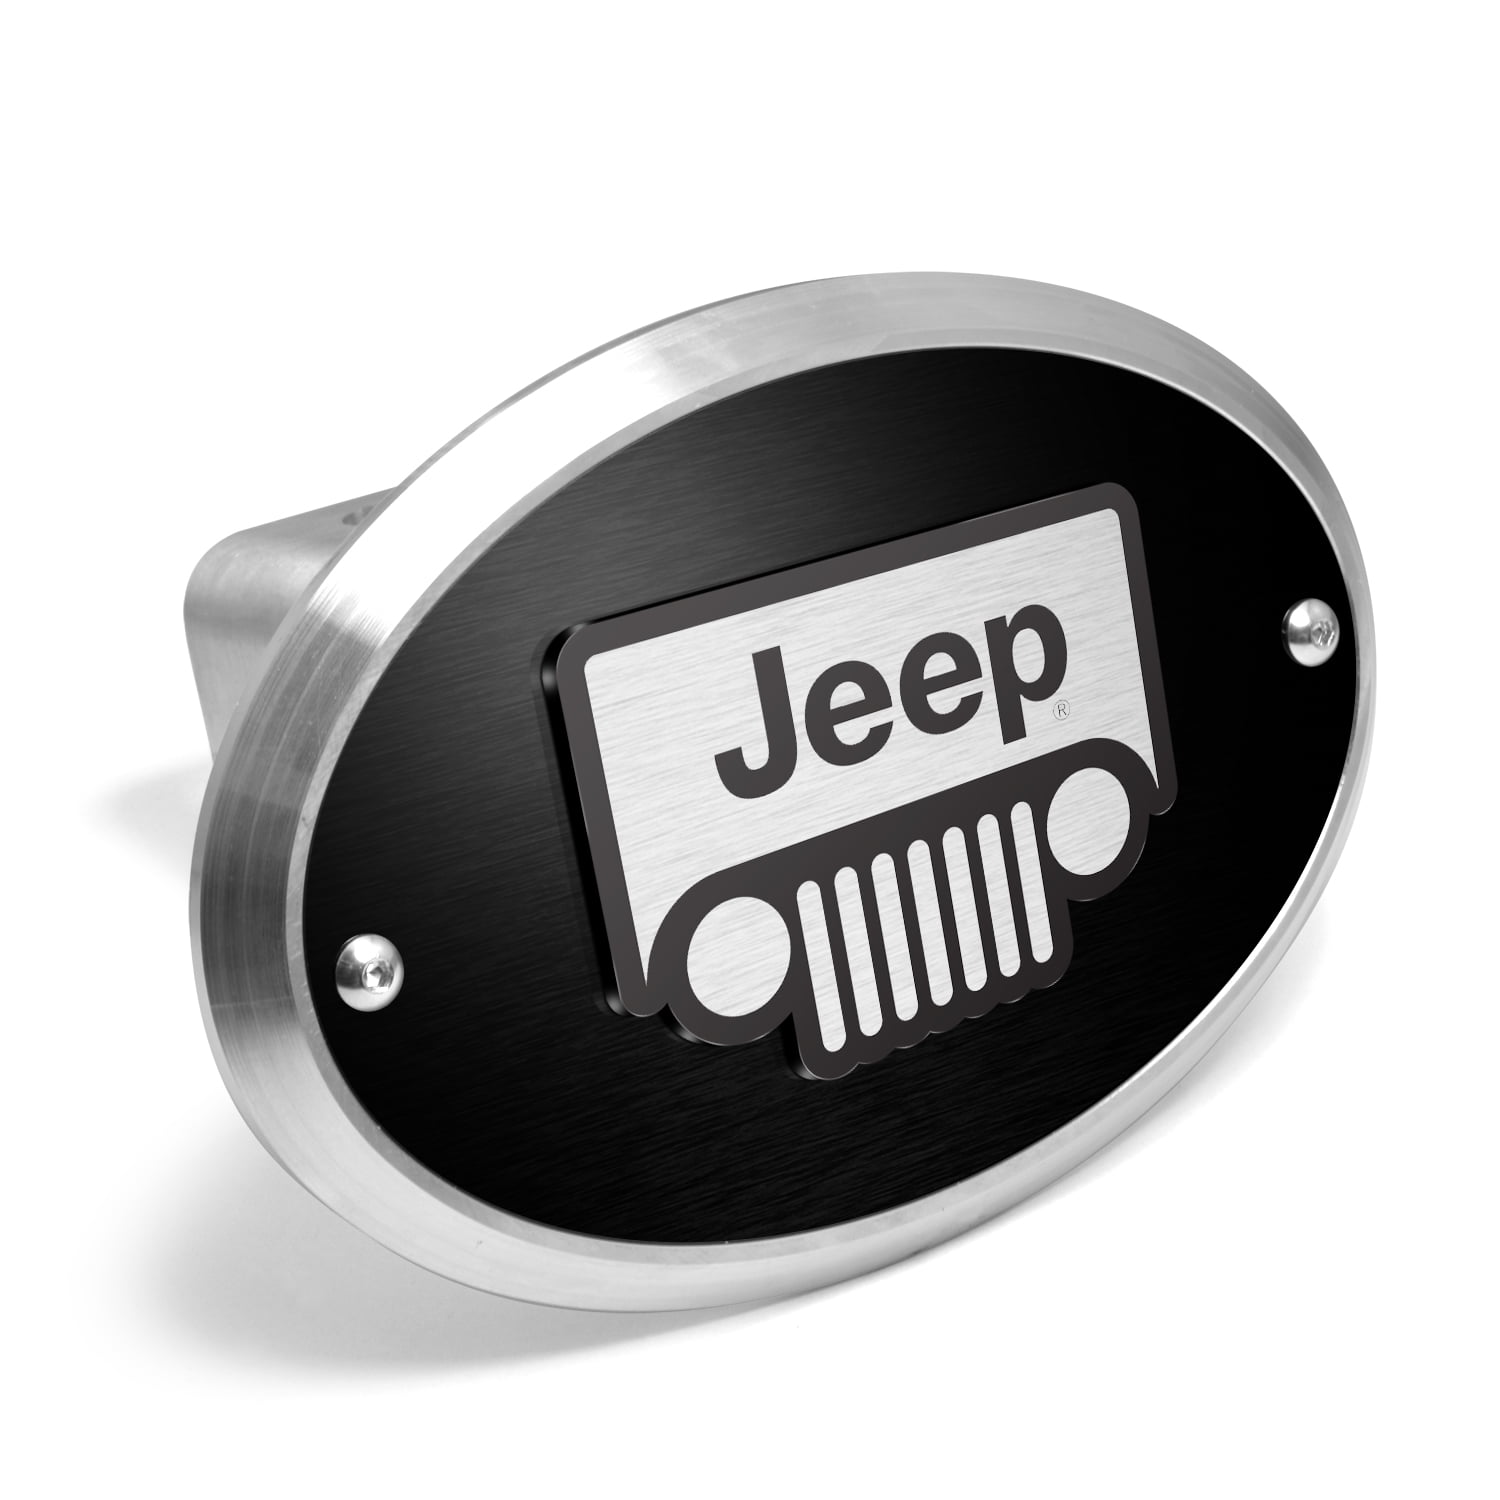 Jeep Brushed Metal Trailer Towing Hitch Receiver Plug Cover 